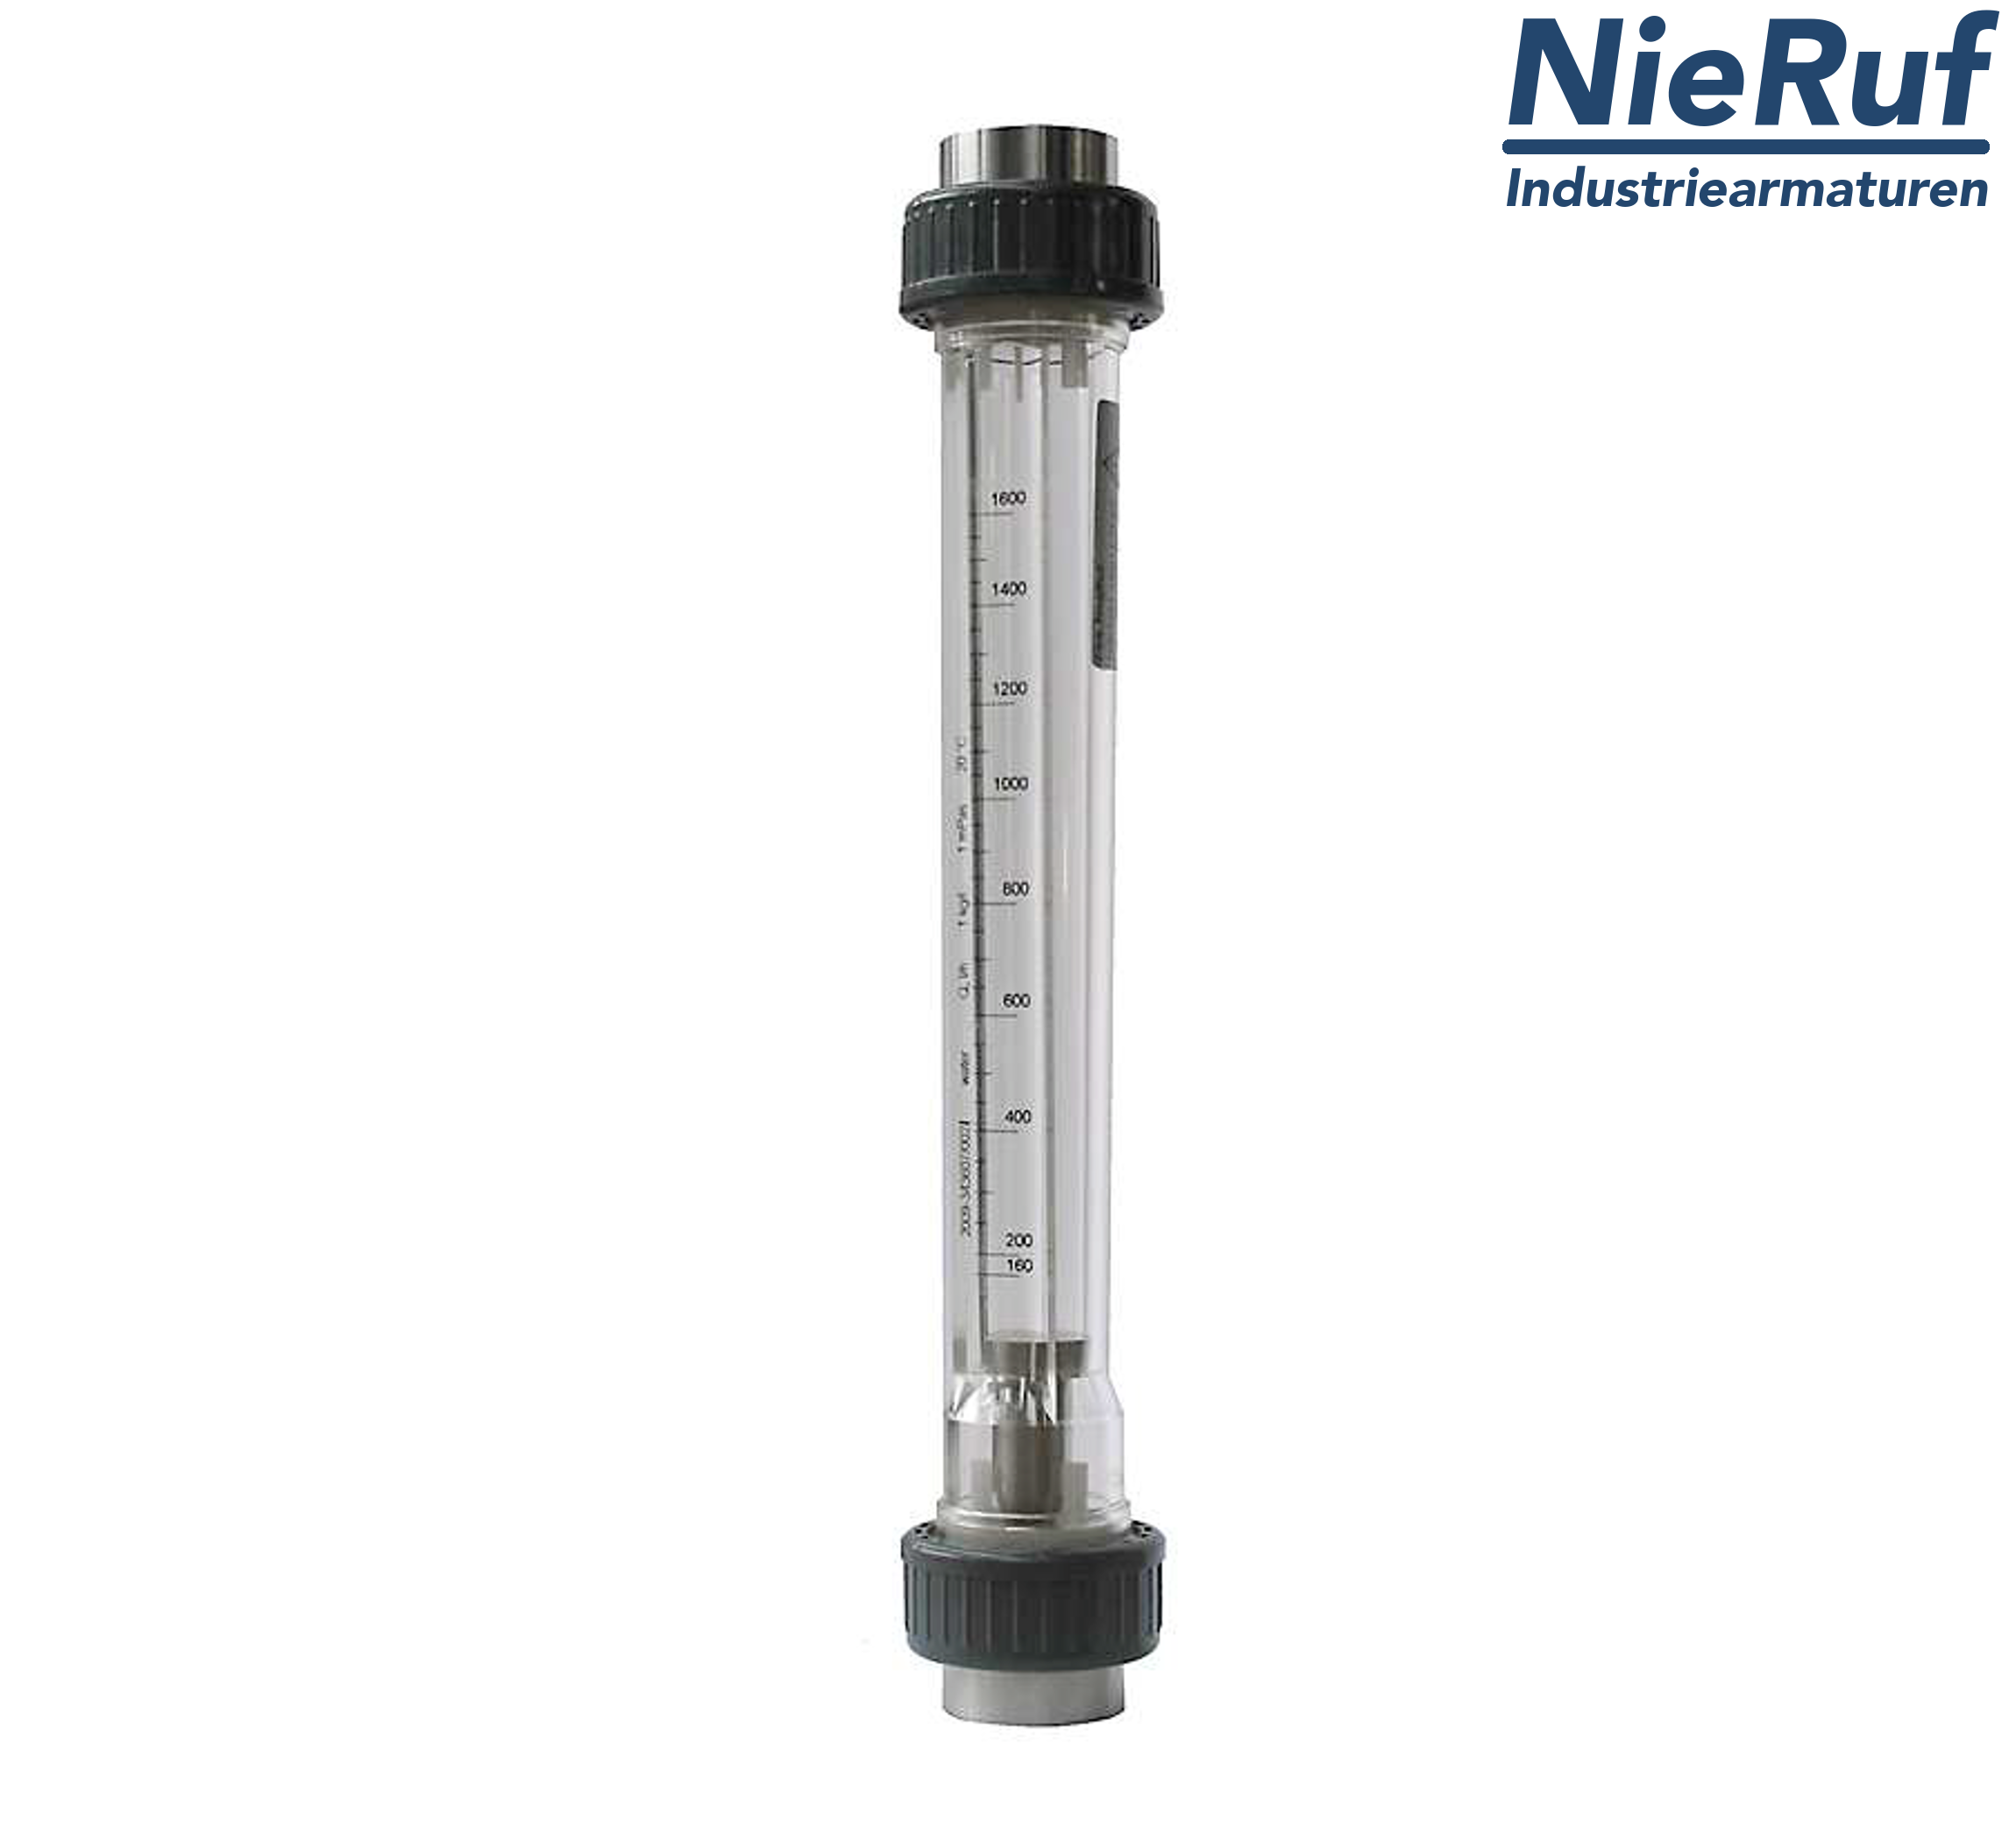 Variable area flowmeter 2" inch 400.0 - 4000 l/h water FKM